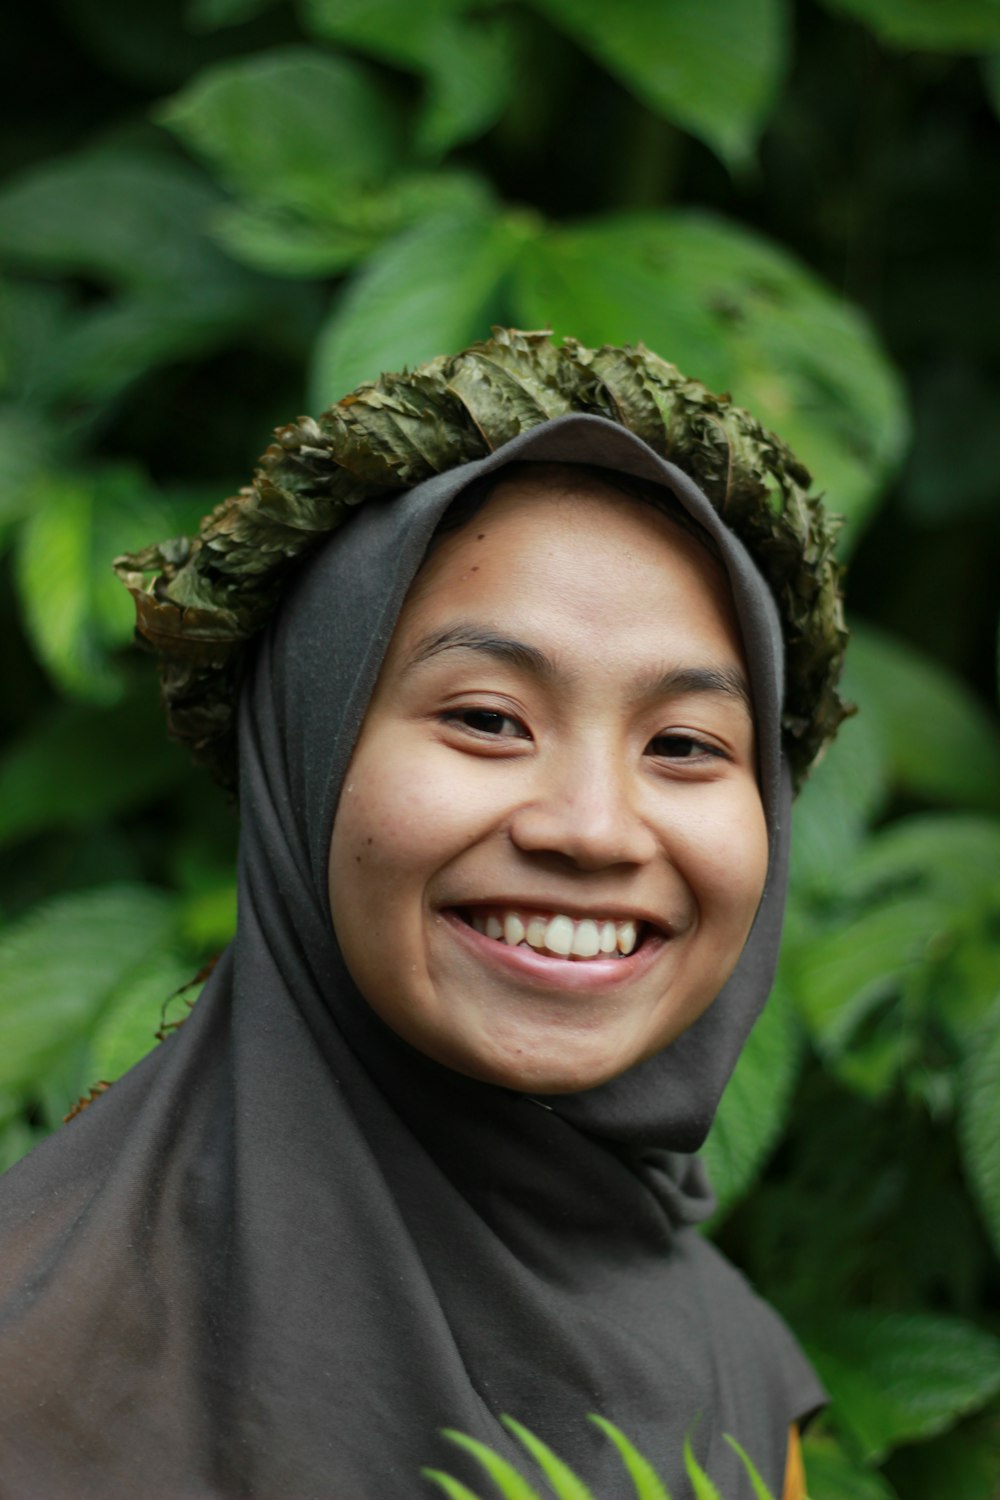 a woman wearing a headscarf smiles for the camera